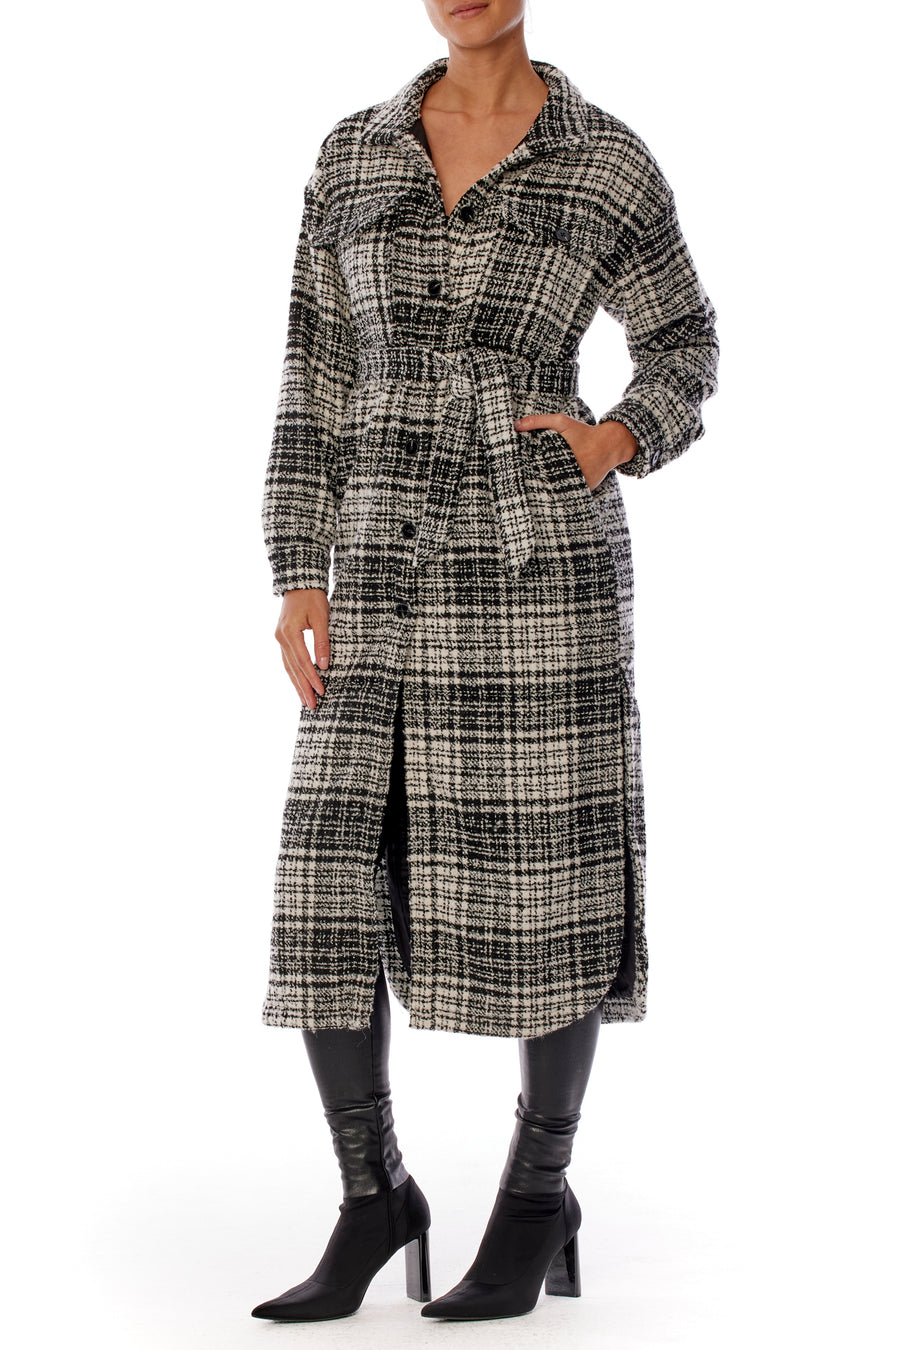 midi length, button up black and white plaid jacket with shirttail hem and waist tie